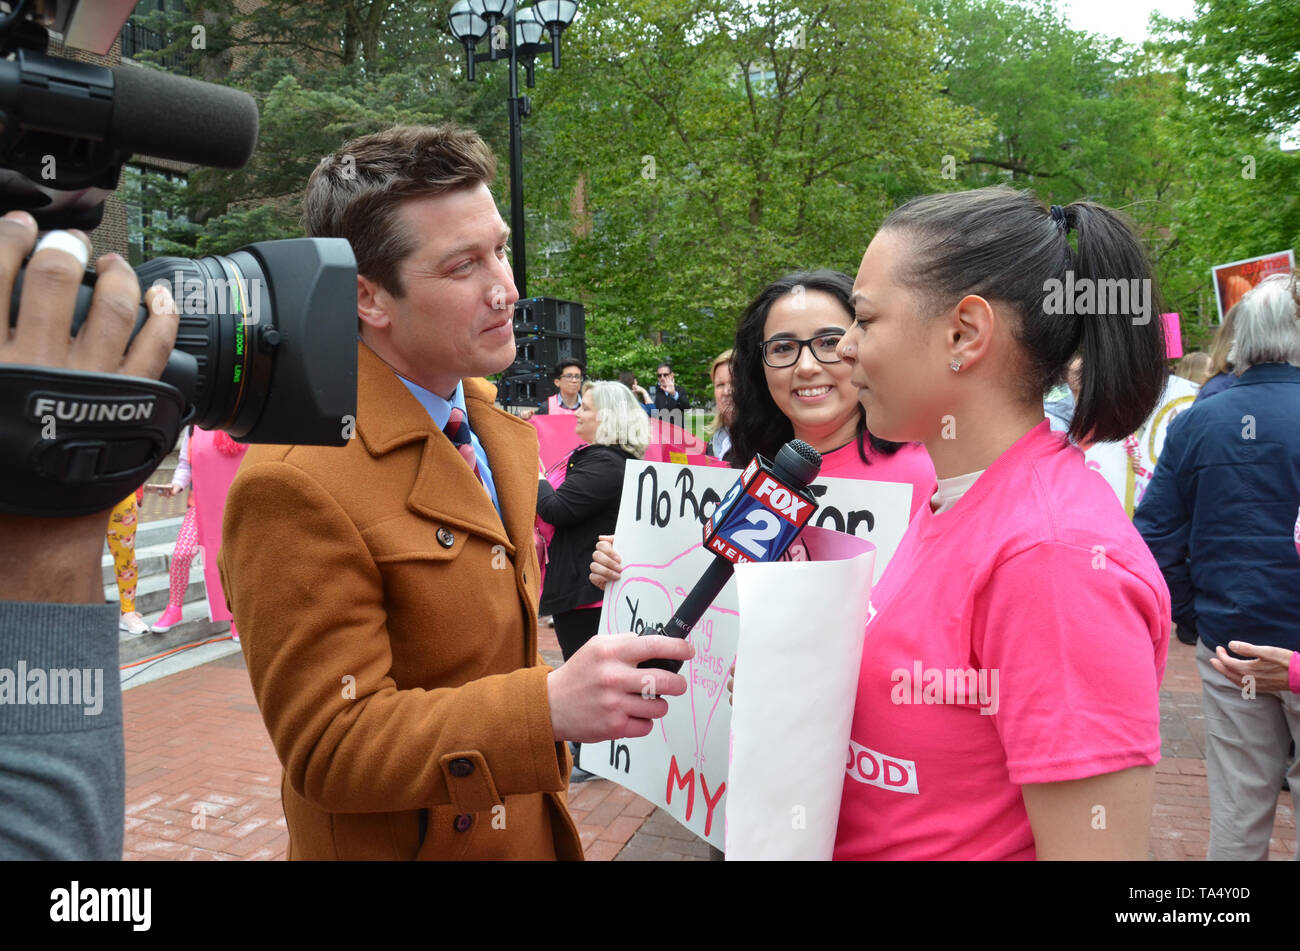 ANN ARBOR, MI/USA - MAY 21, 2019: A Fox 2 Detroit reporter interviews a protester before the  Ann Arbor Stop the Bans protest organized by Planned Par Stock Photo